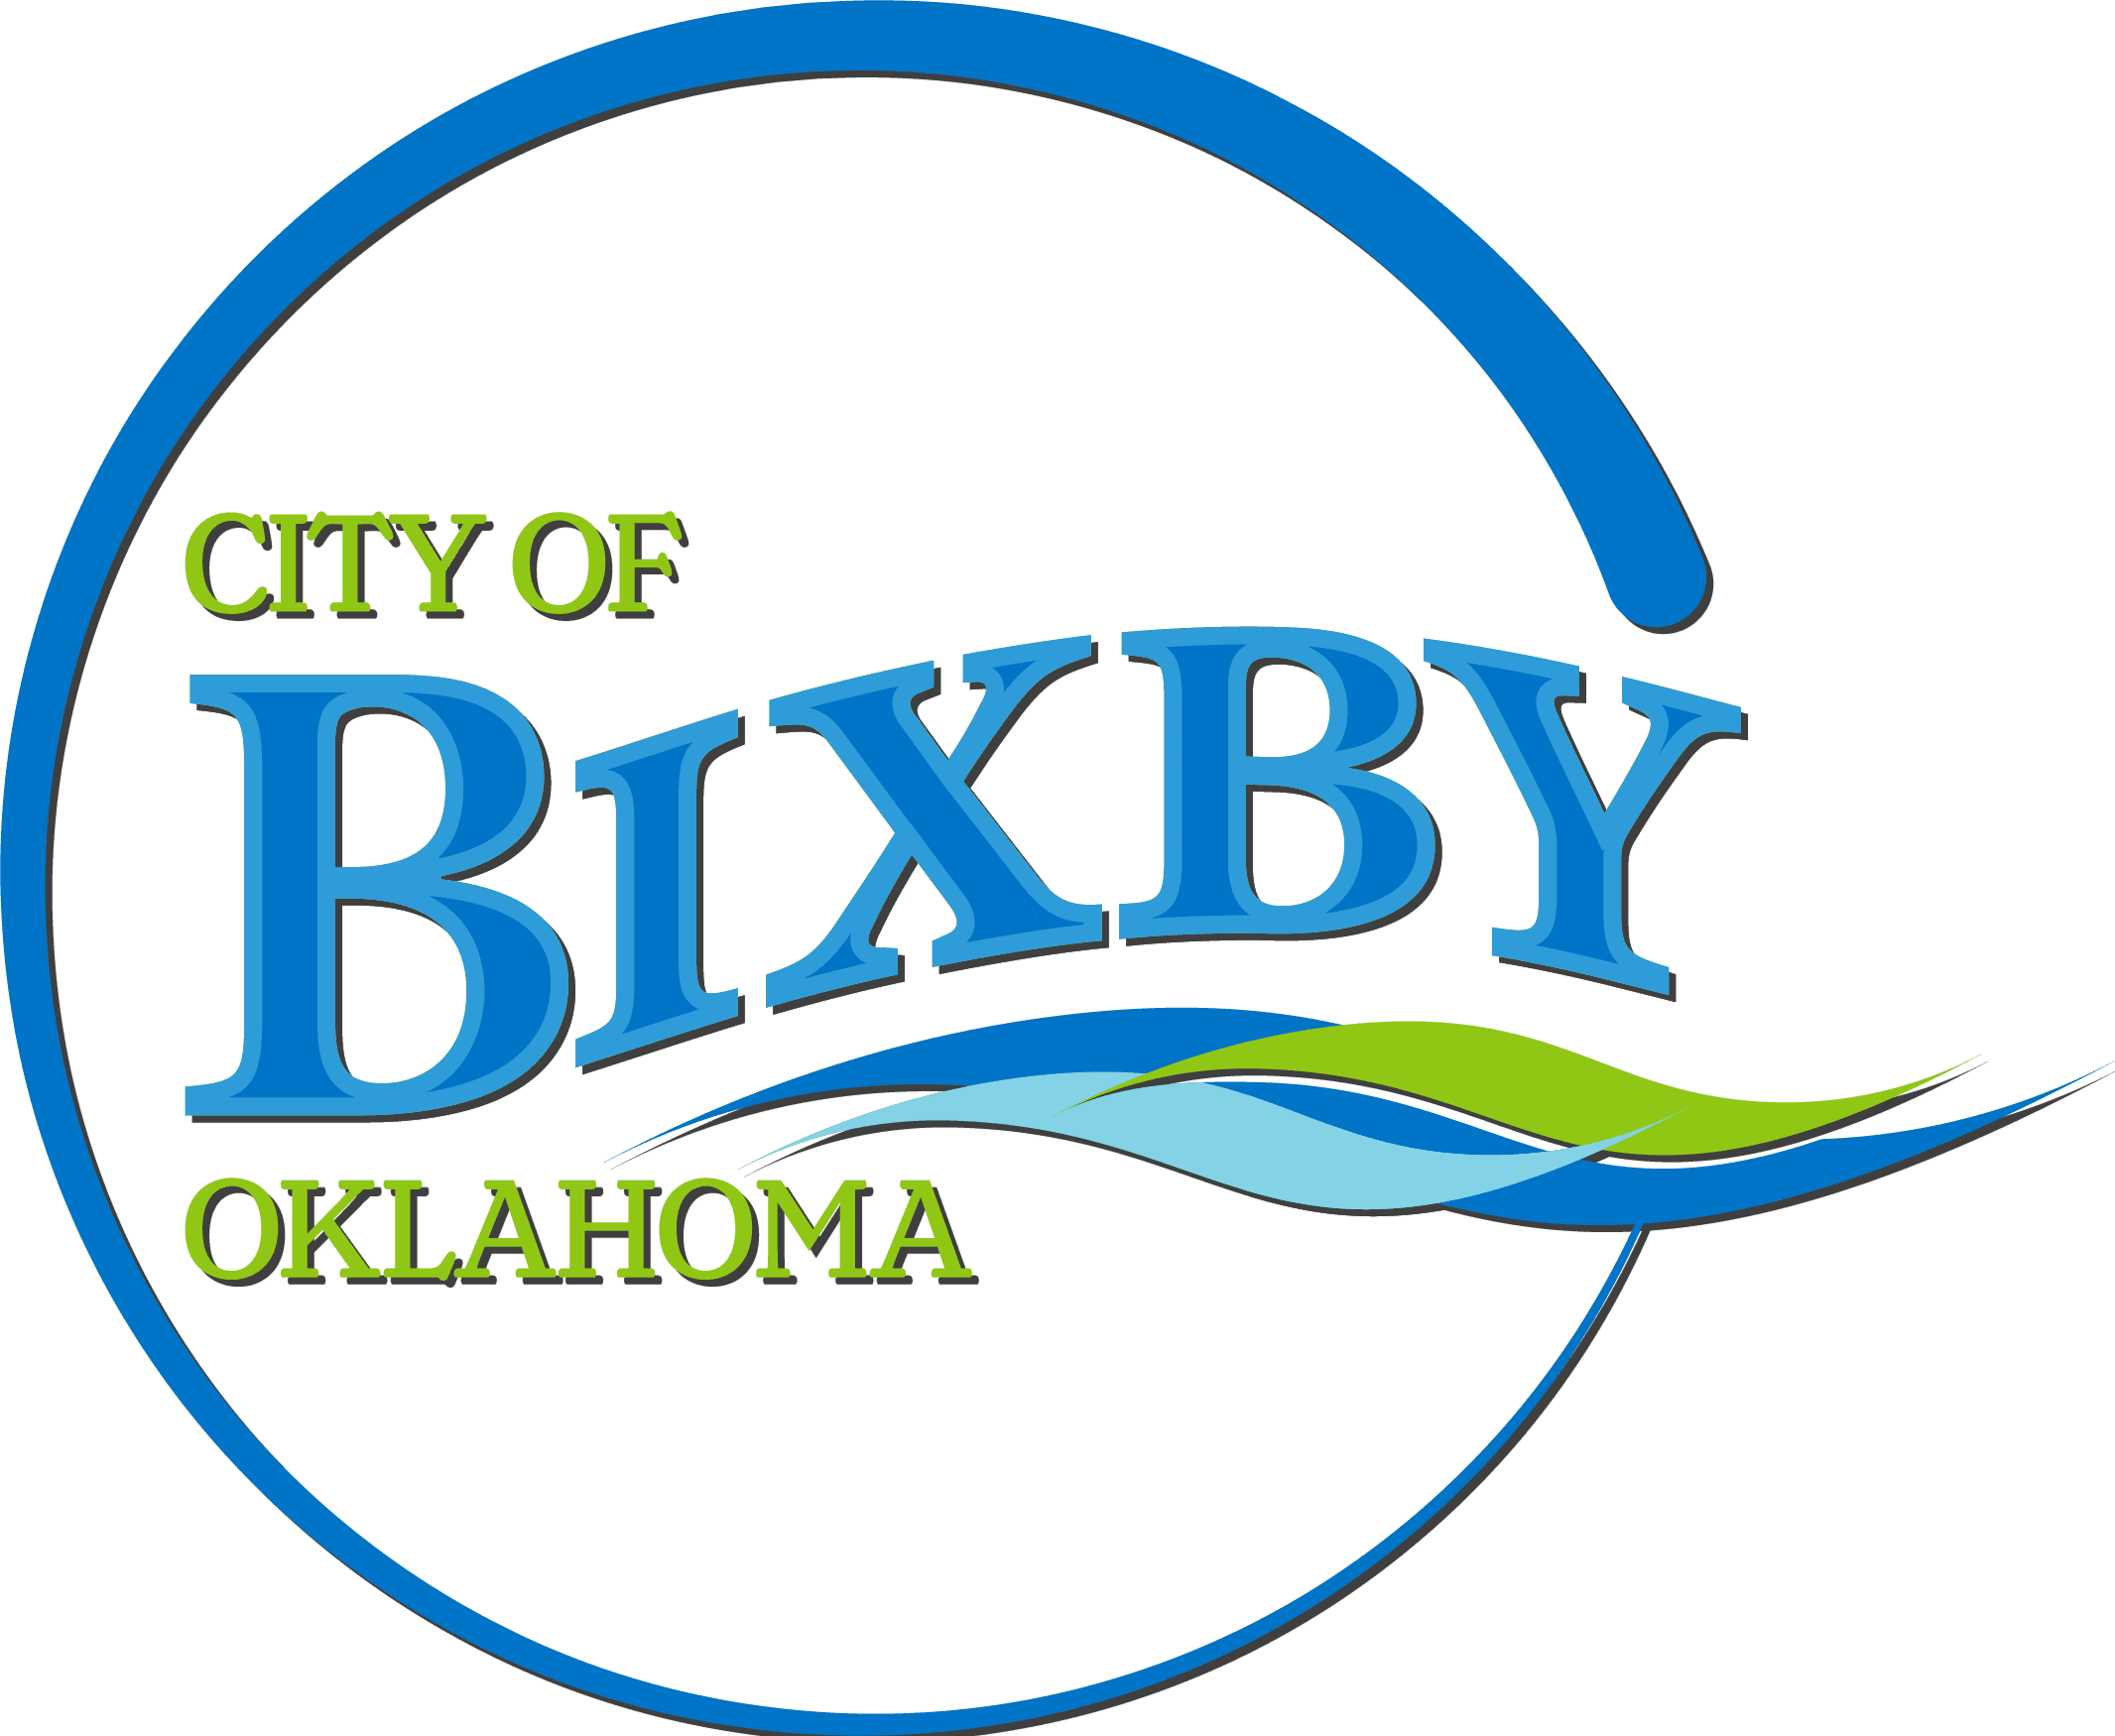 A city of bixby logo is shown.